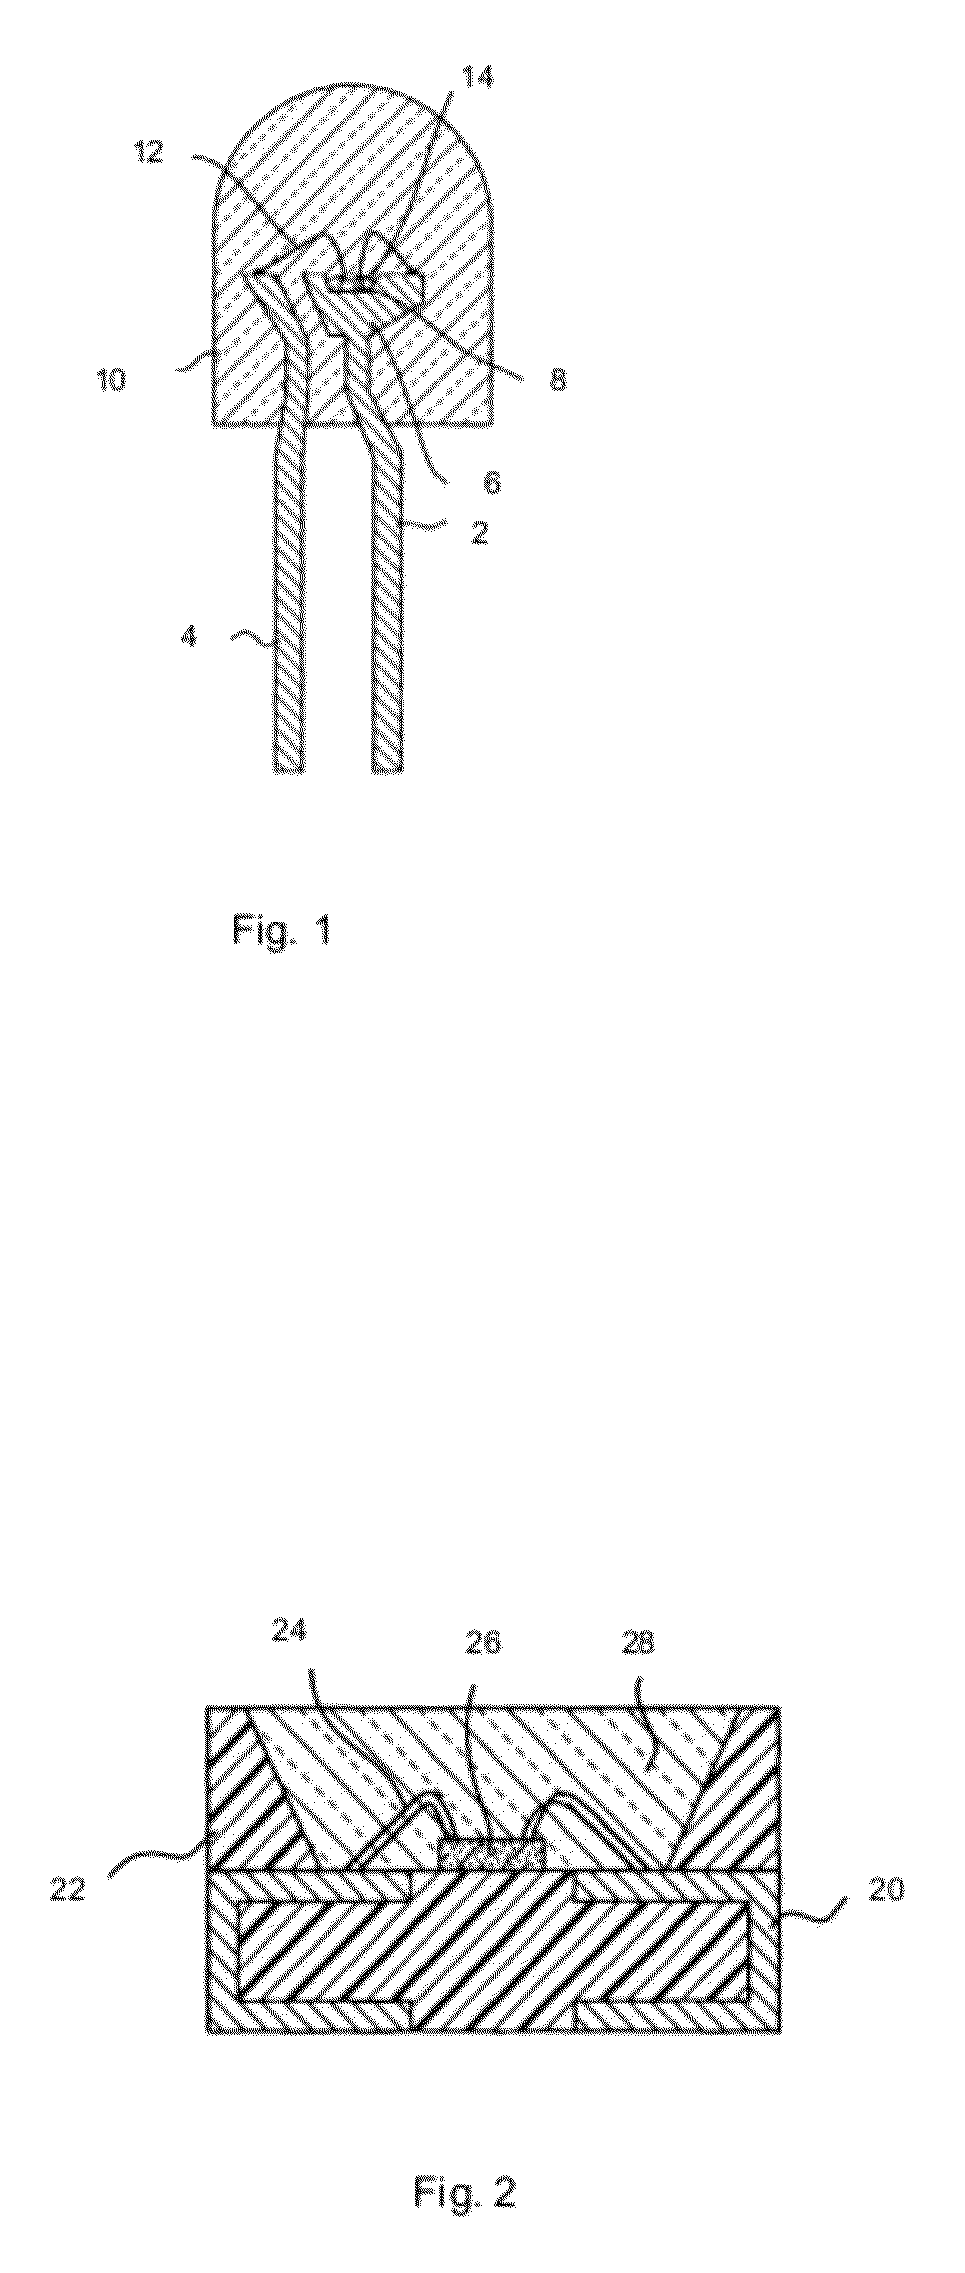 Vertical light emitting diodes (LED) having metal substrate and spin coated phosphor layer for producing white light